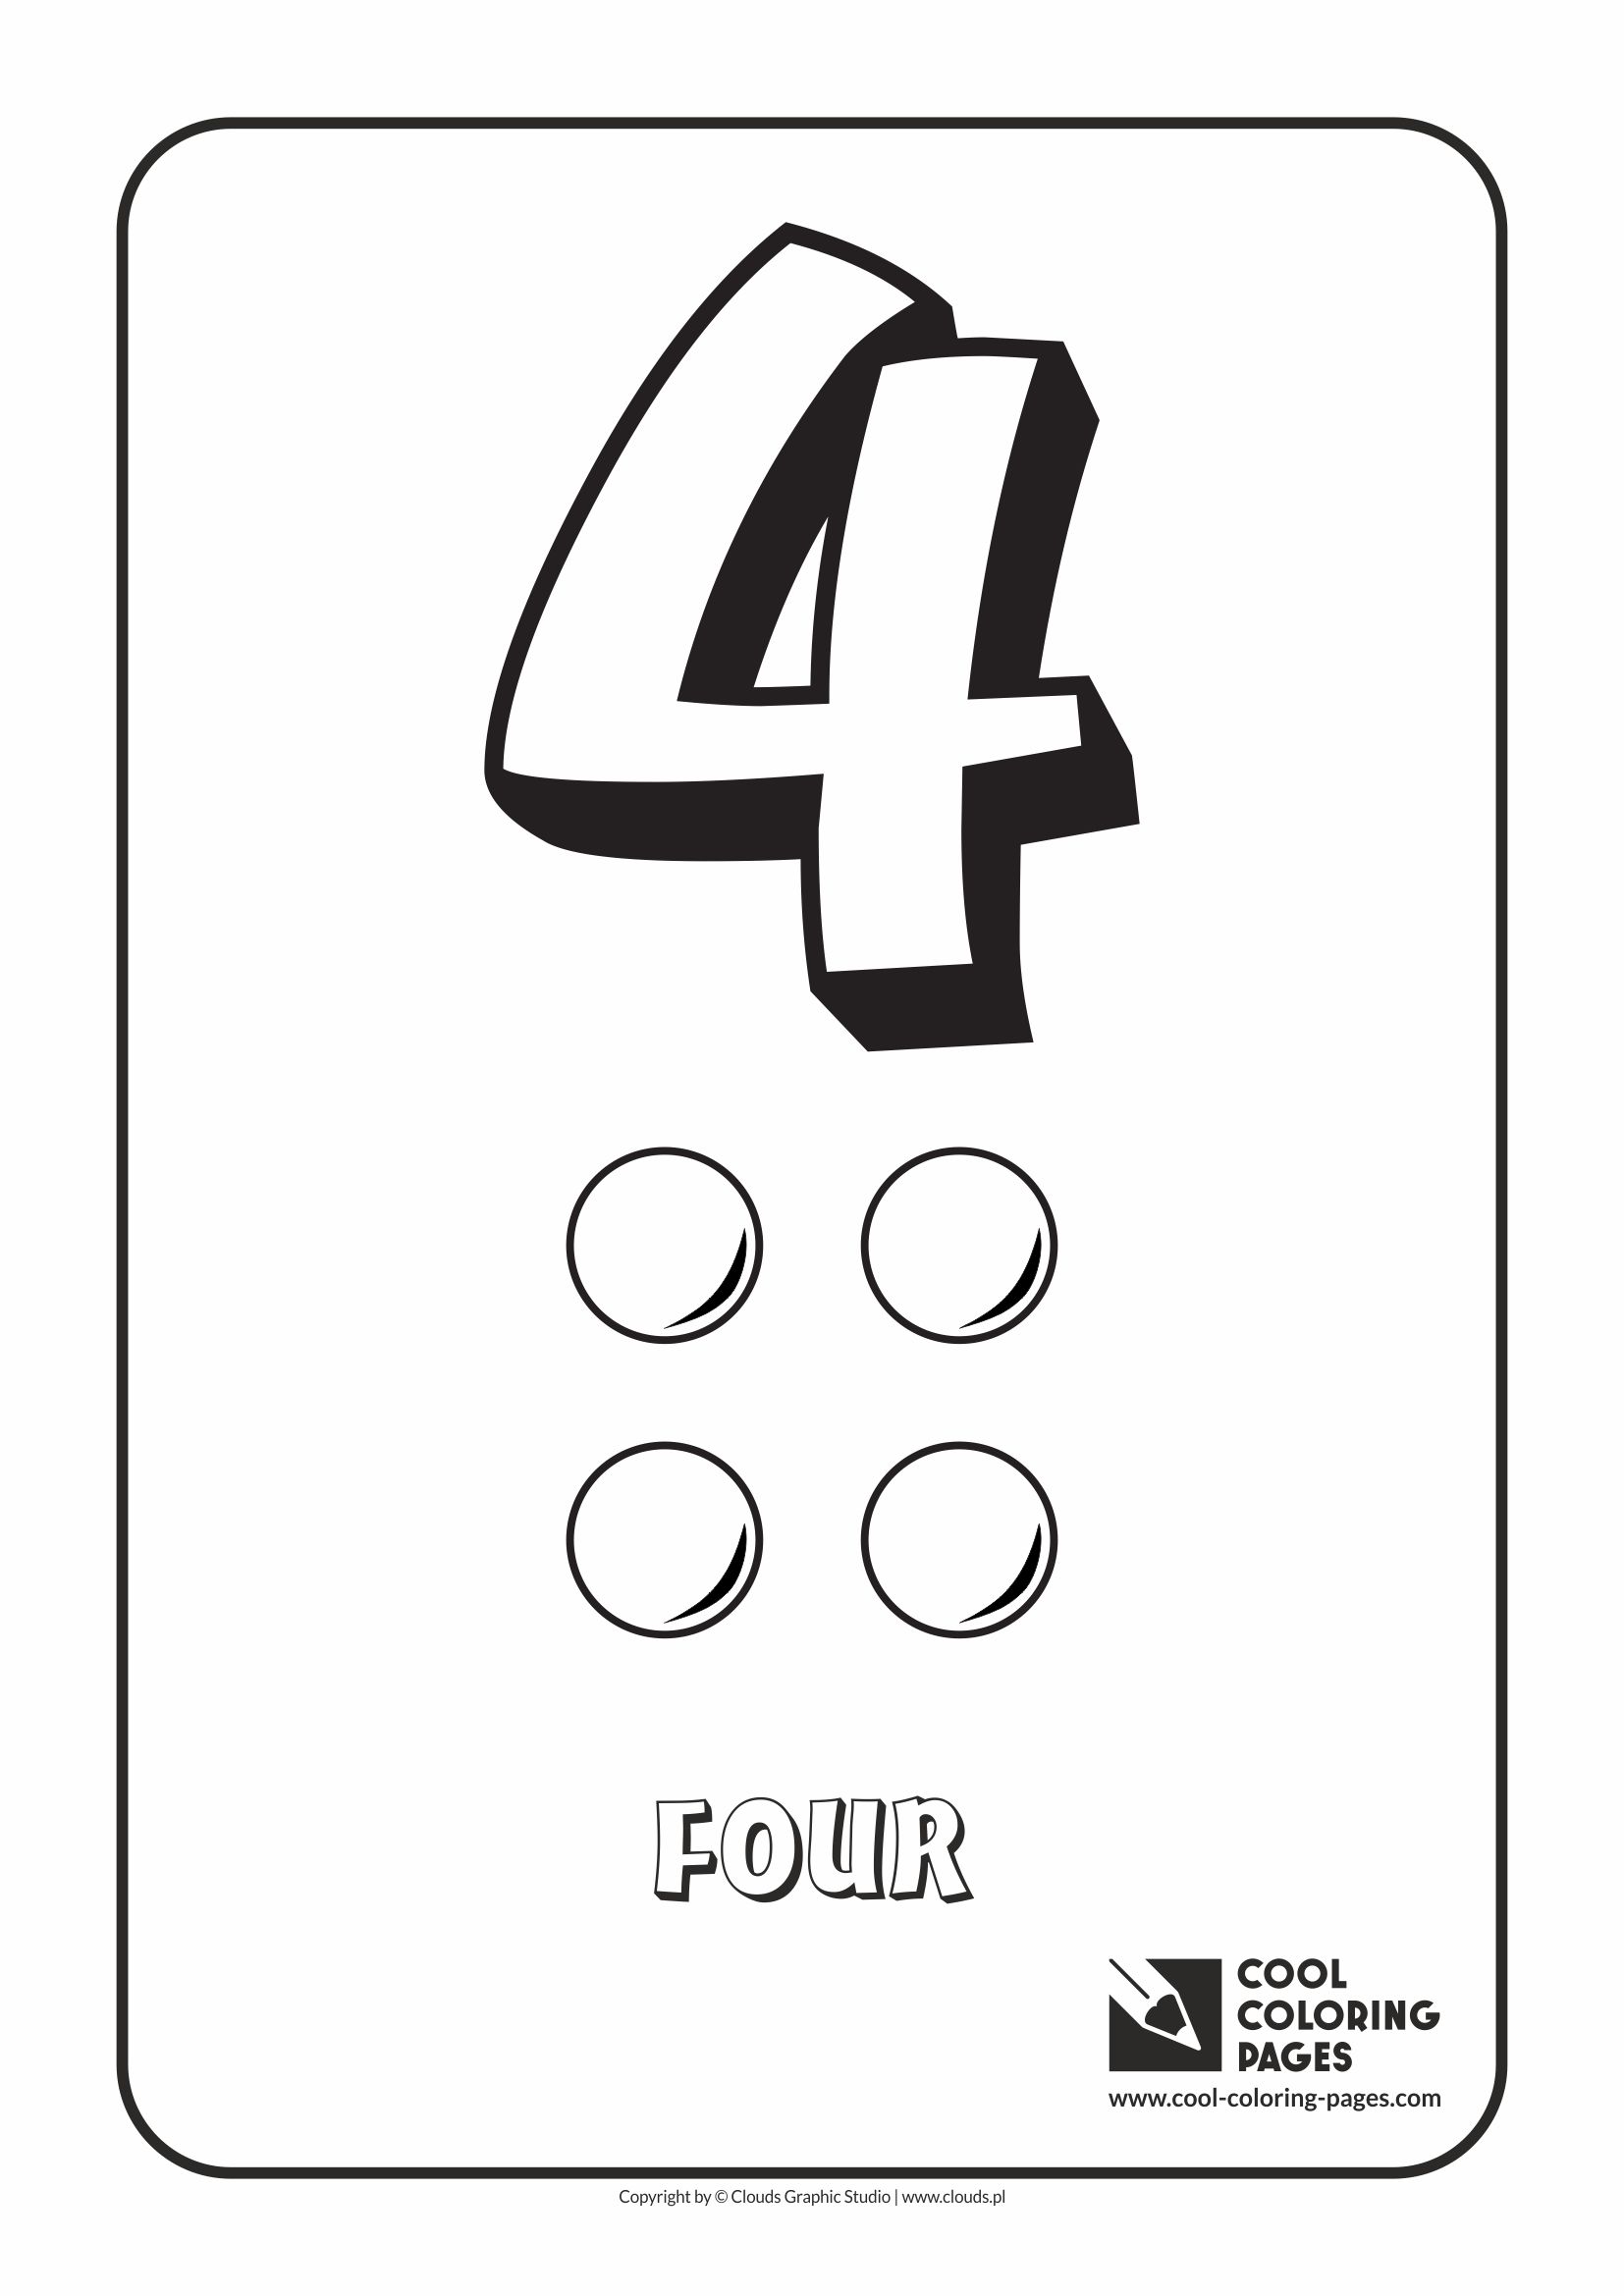 Cool Coloring Pages - Digits / Digit 4 / Coloring page with digit 4